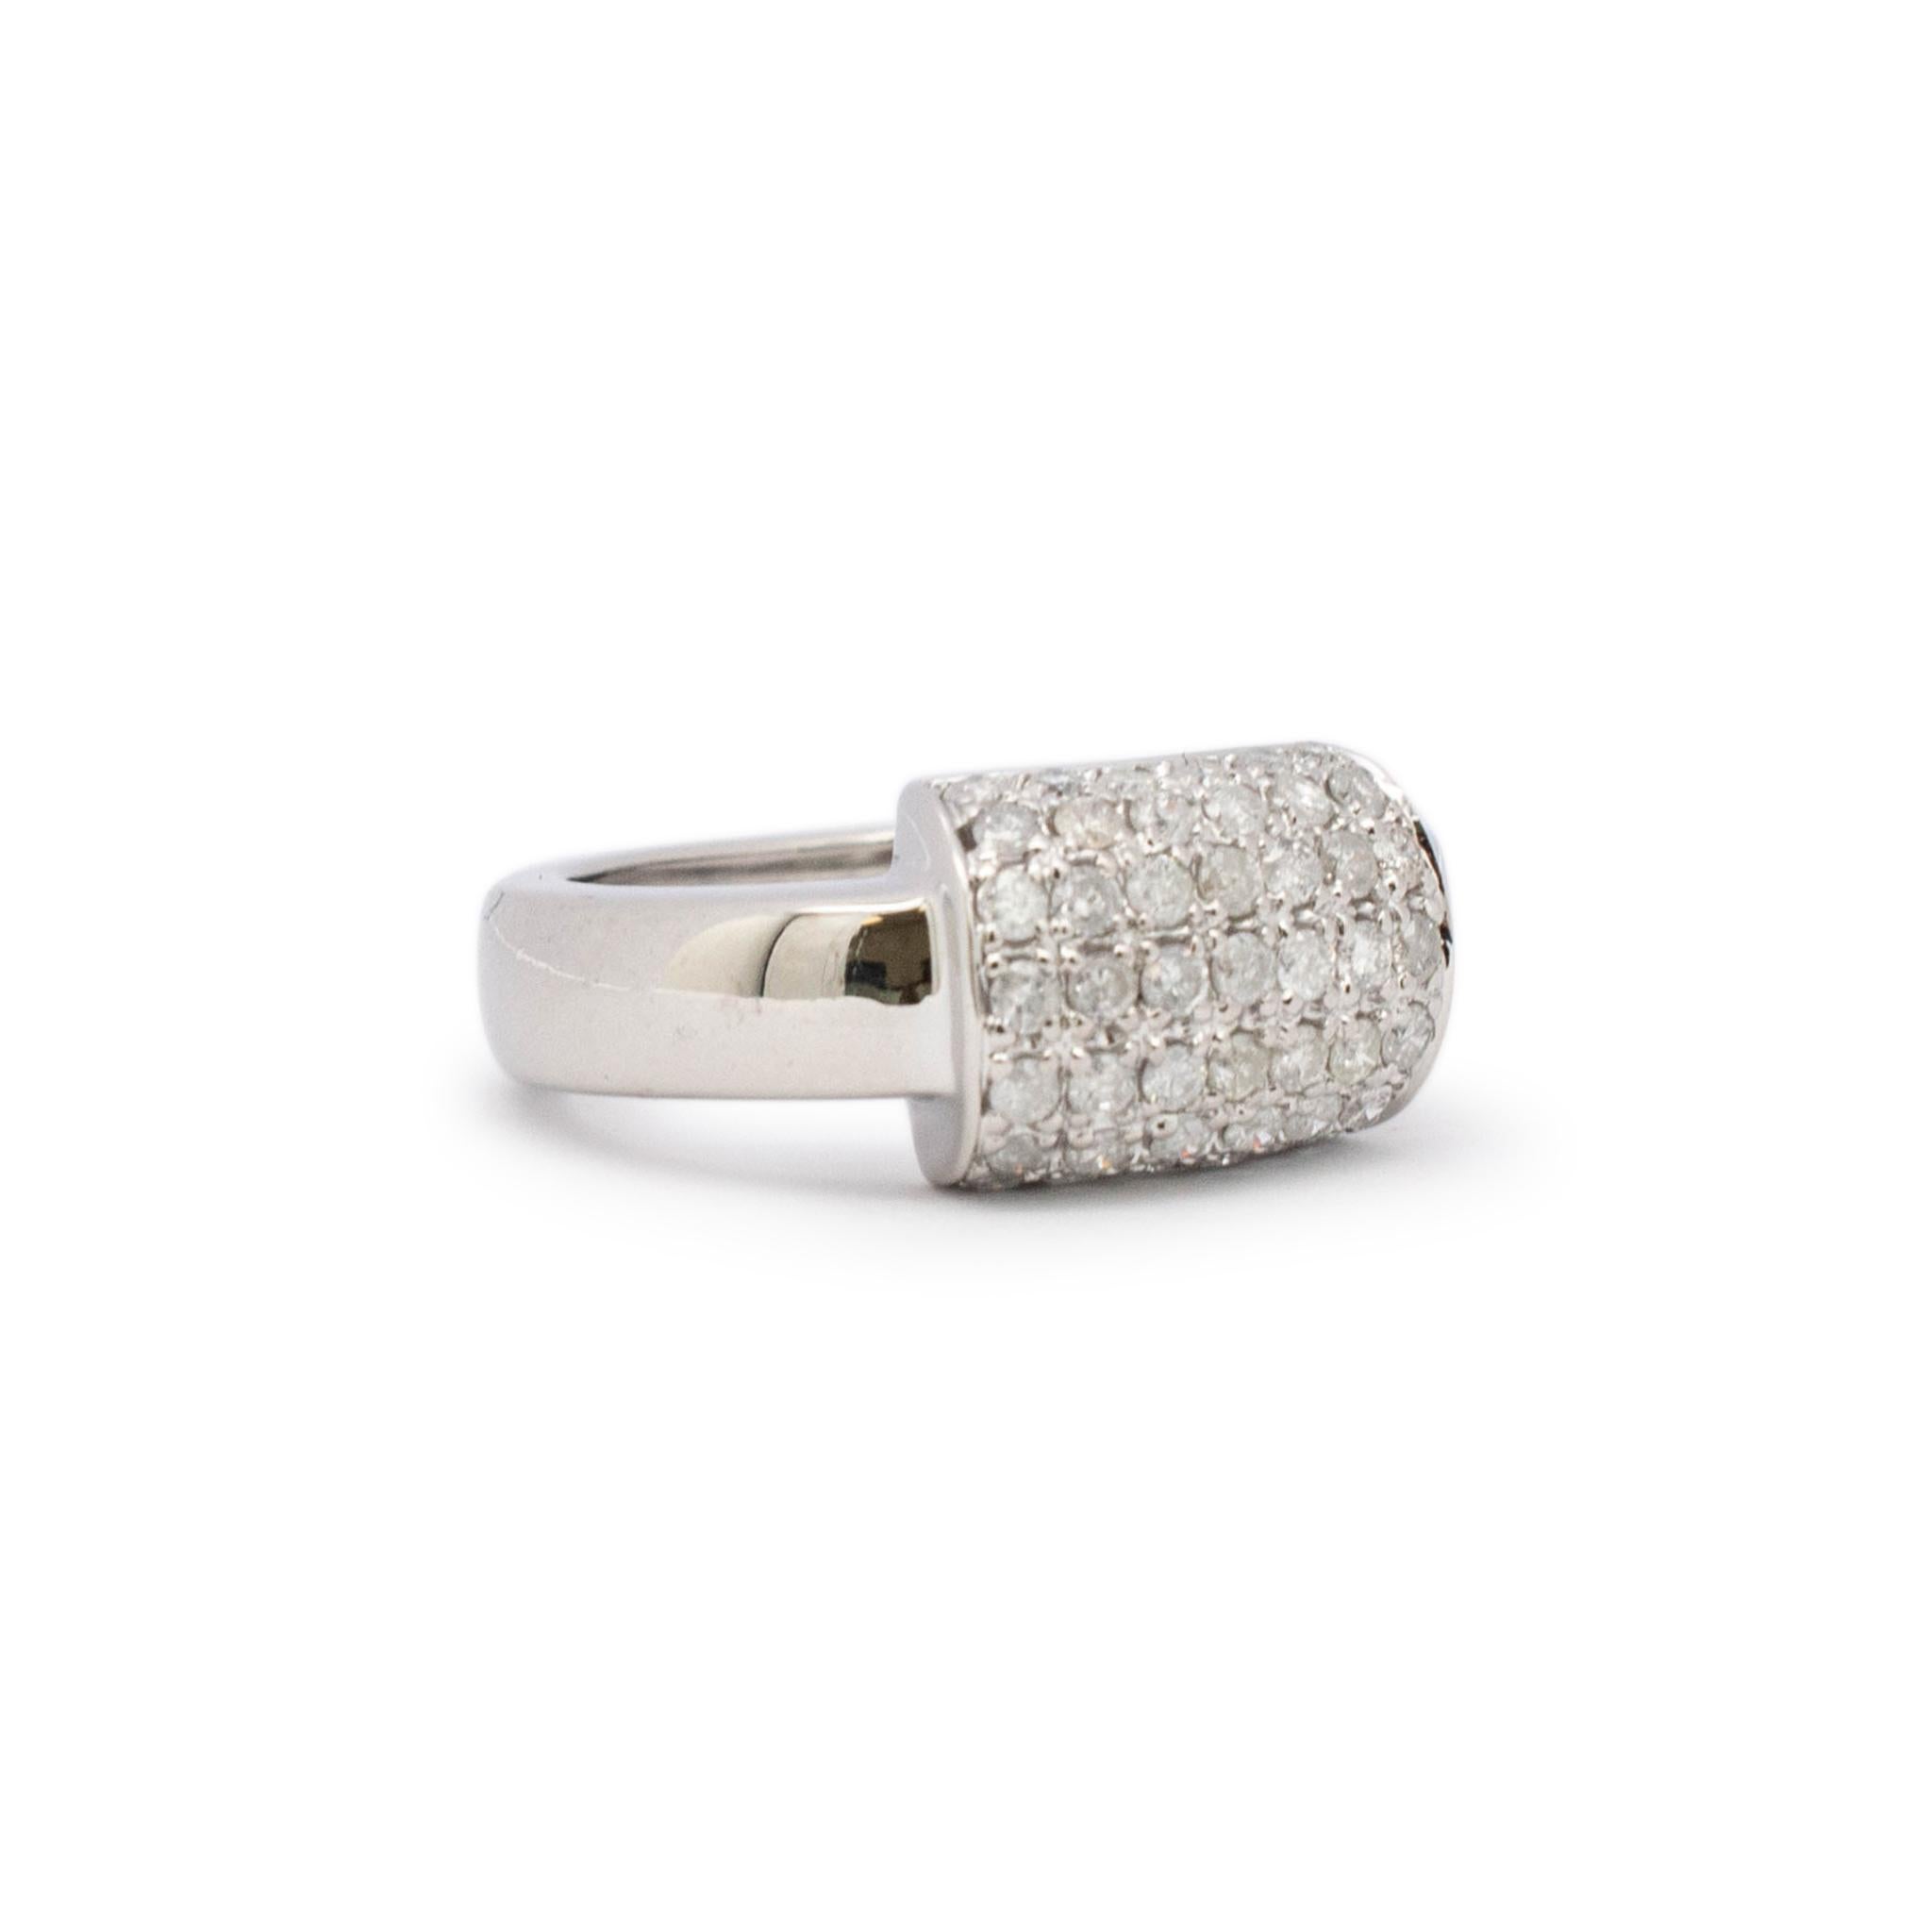 Ladies 14k White Gold Pave Diamond Cocktail Ring In Excellent Condition For Sale In Houston, TX